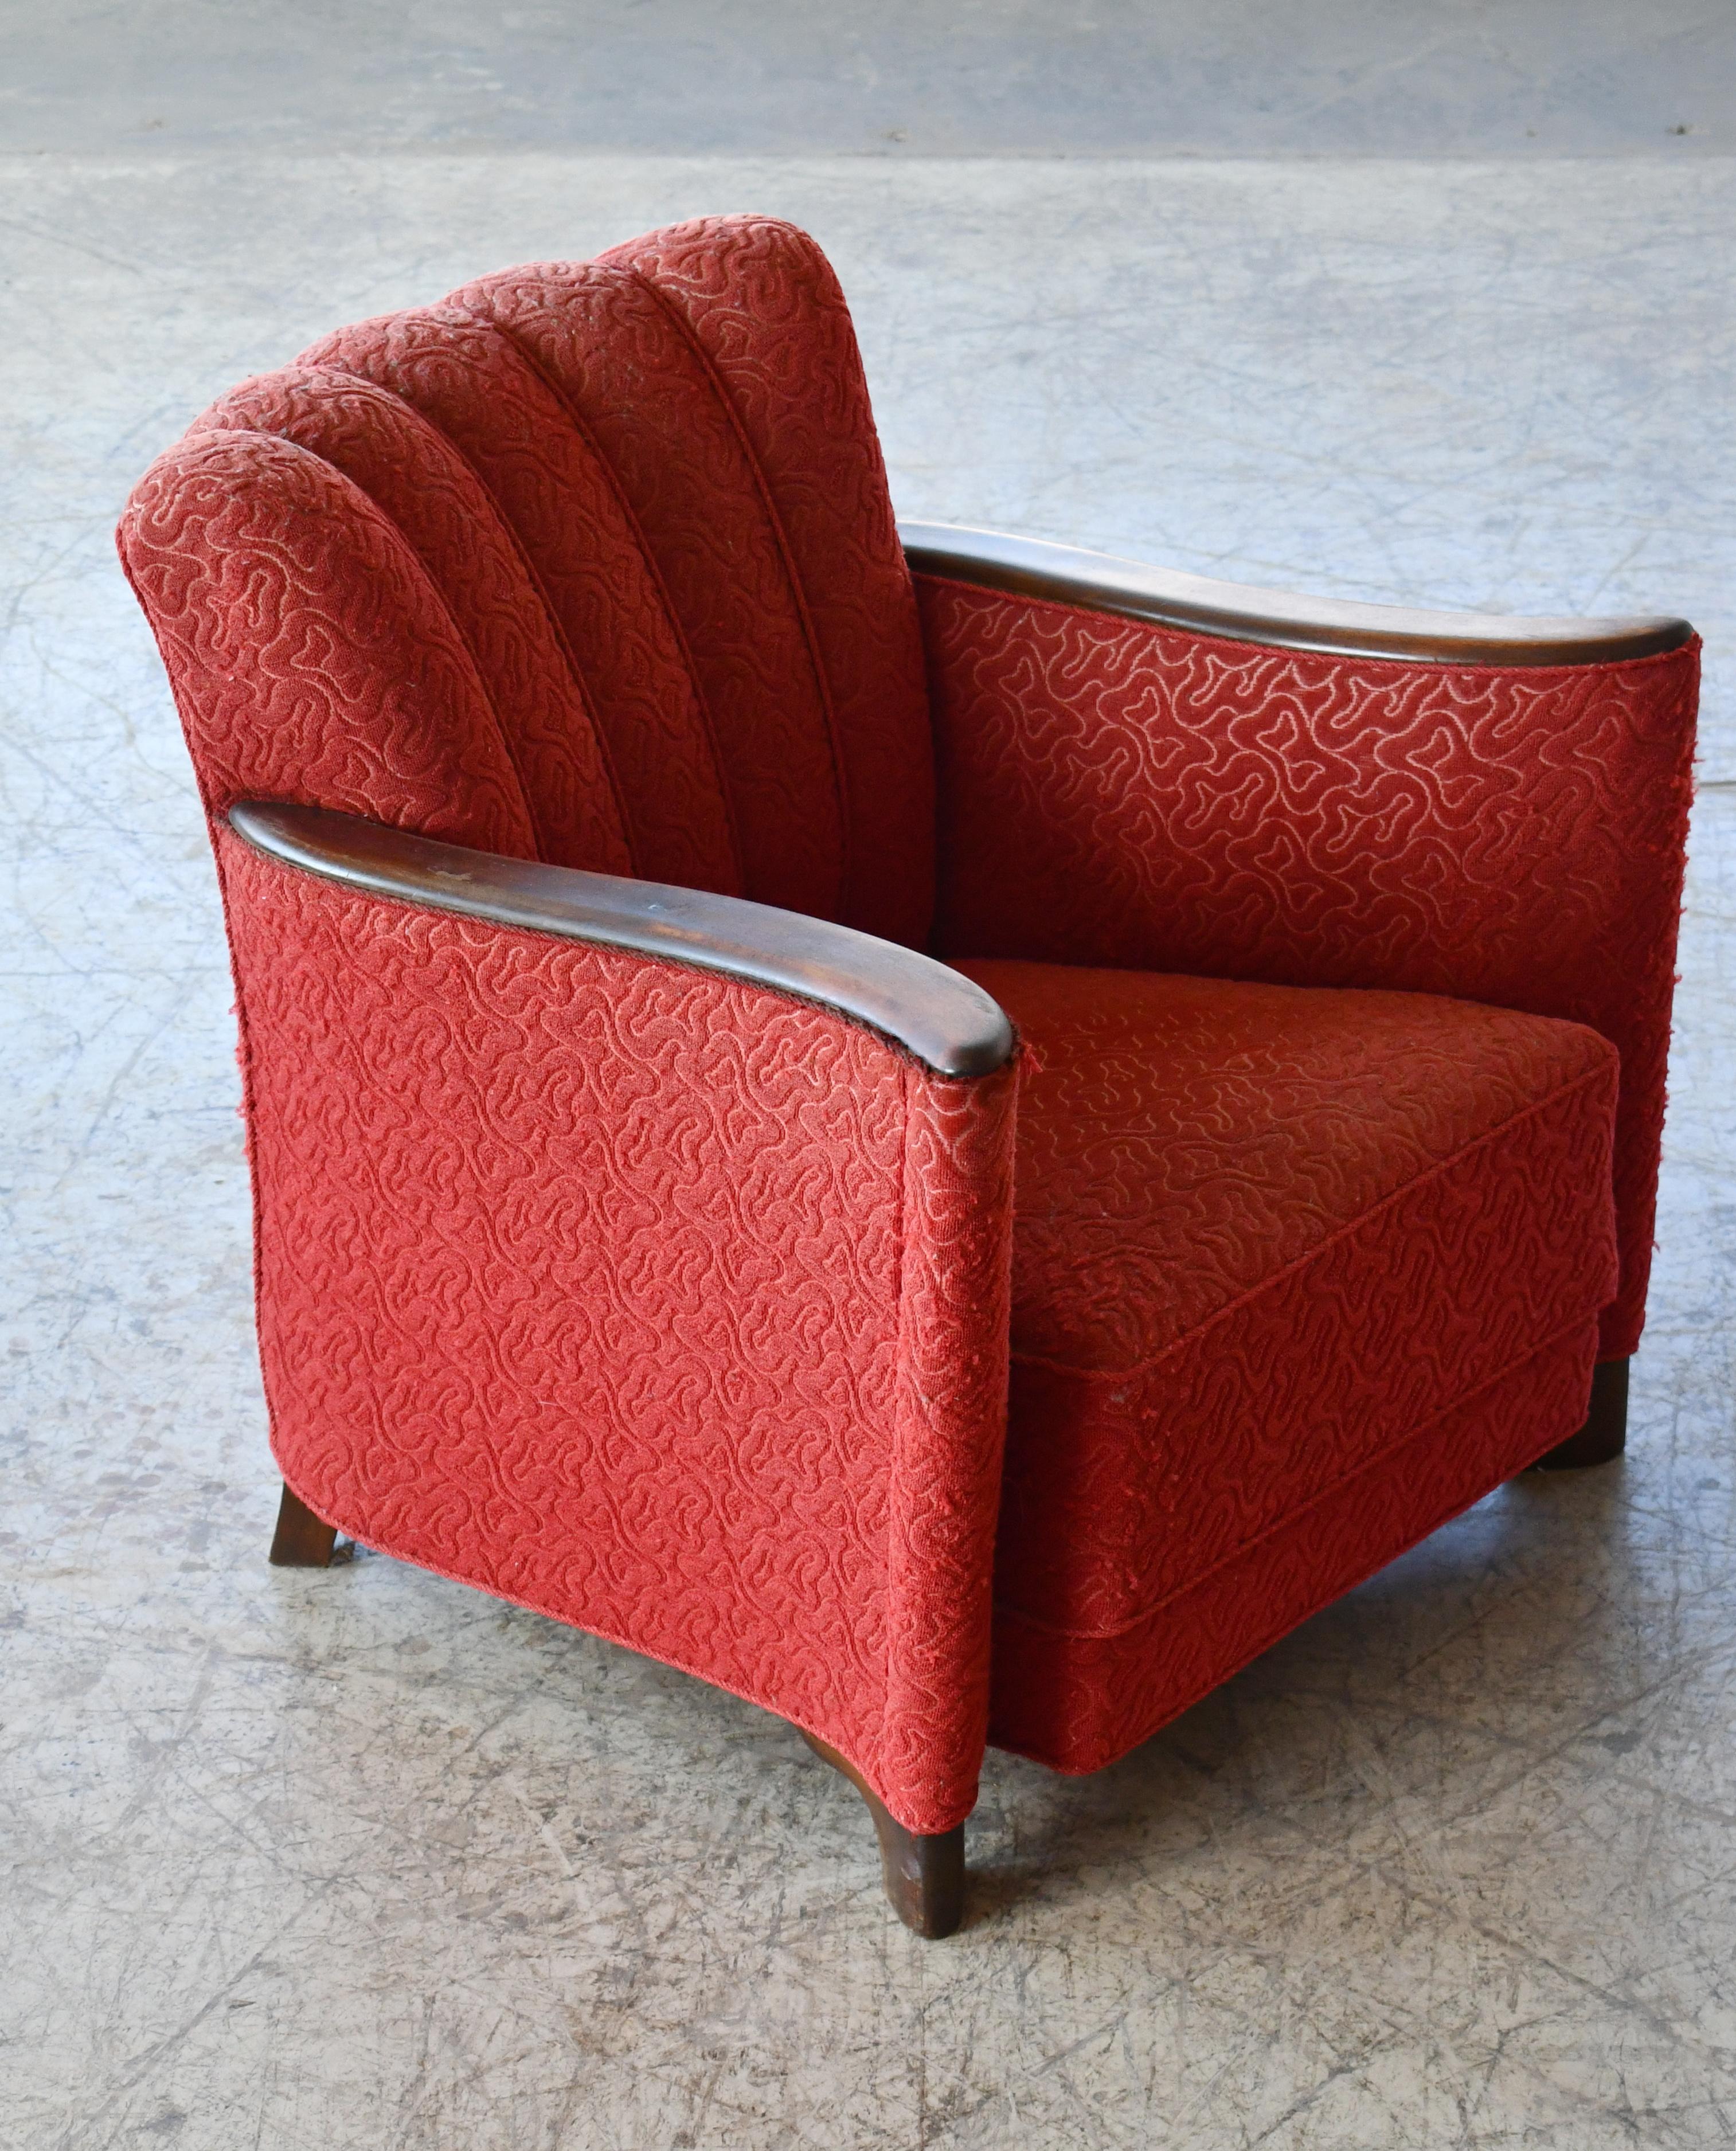 Danish 1930s Art Deco Lounge Chair in Red Mohair with Mahogany Accents For Sale 1